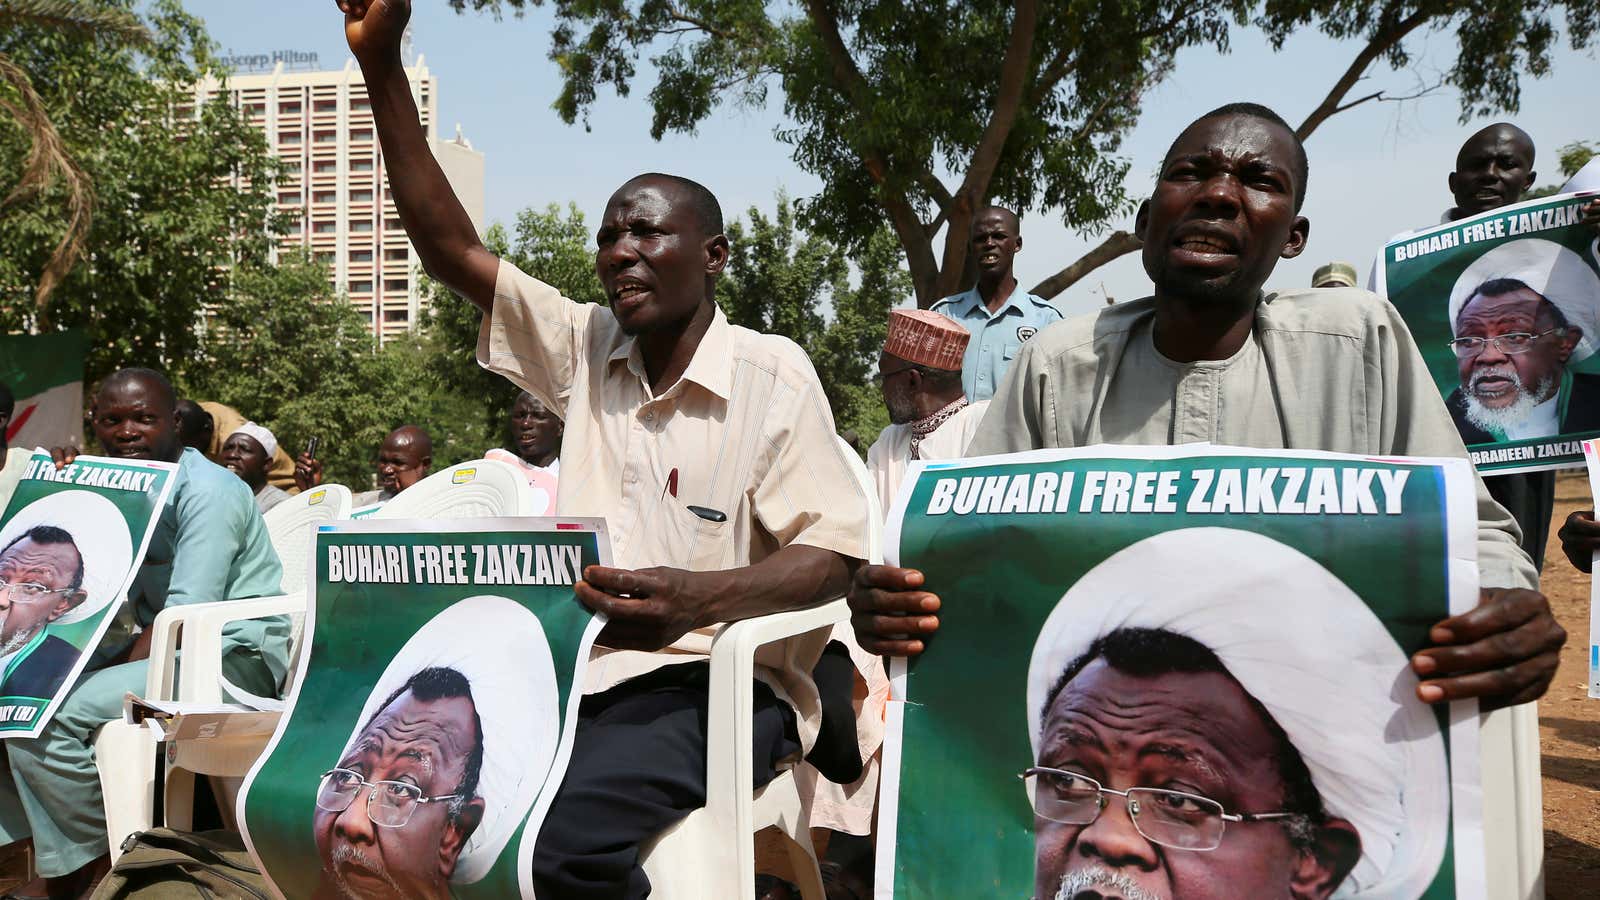 El Zakzaky’s continued imprisonment has become a rallying call for the Islamic Movement of Nigeria